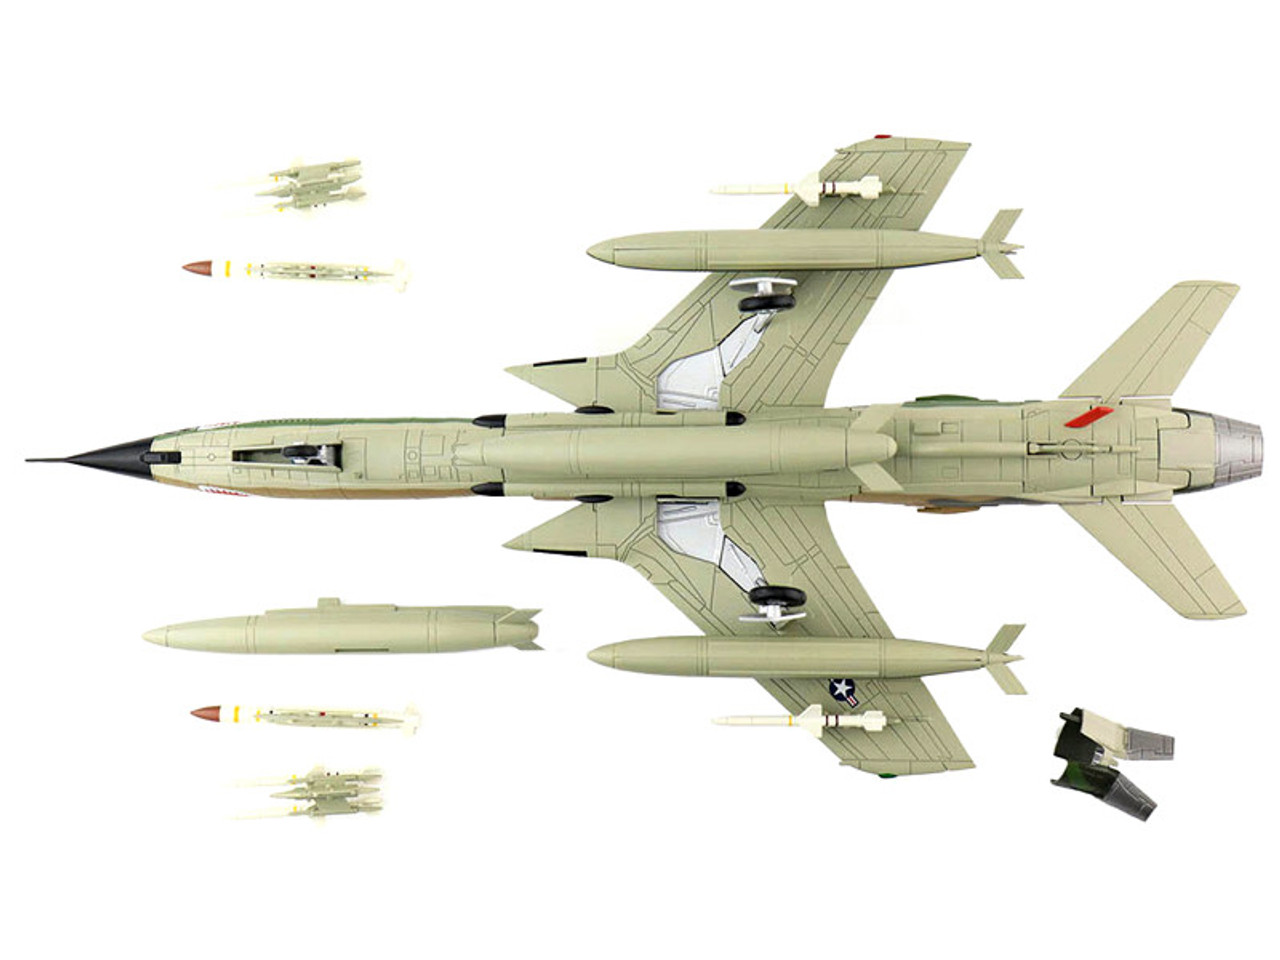 Republic F-105G Thunderchief Fighter Aircraft "17th Wild Weasel Squadron 388 Tactical Fighter Wing, Korat Royal Thai Air Base" (1973) "Air Power Series" 1/72 Diecast Model by Hobby Master